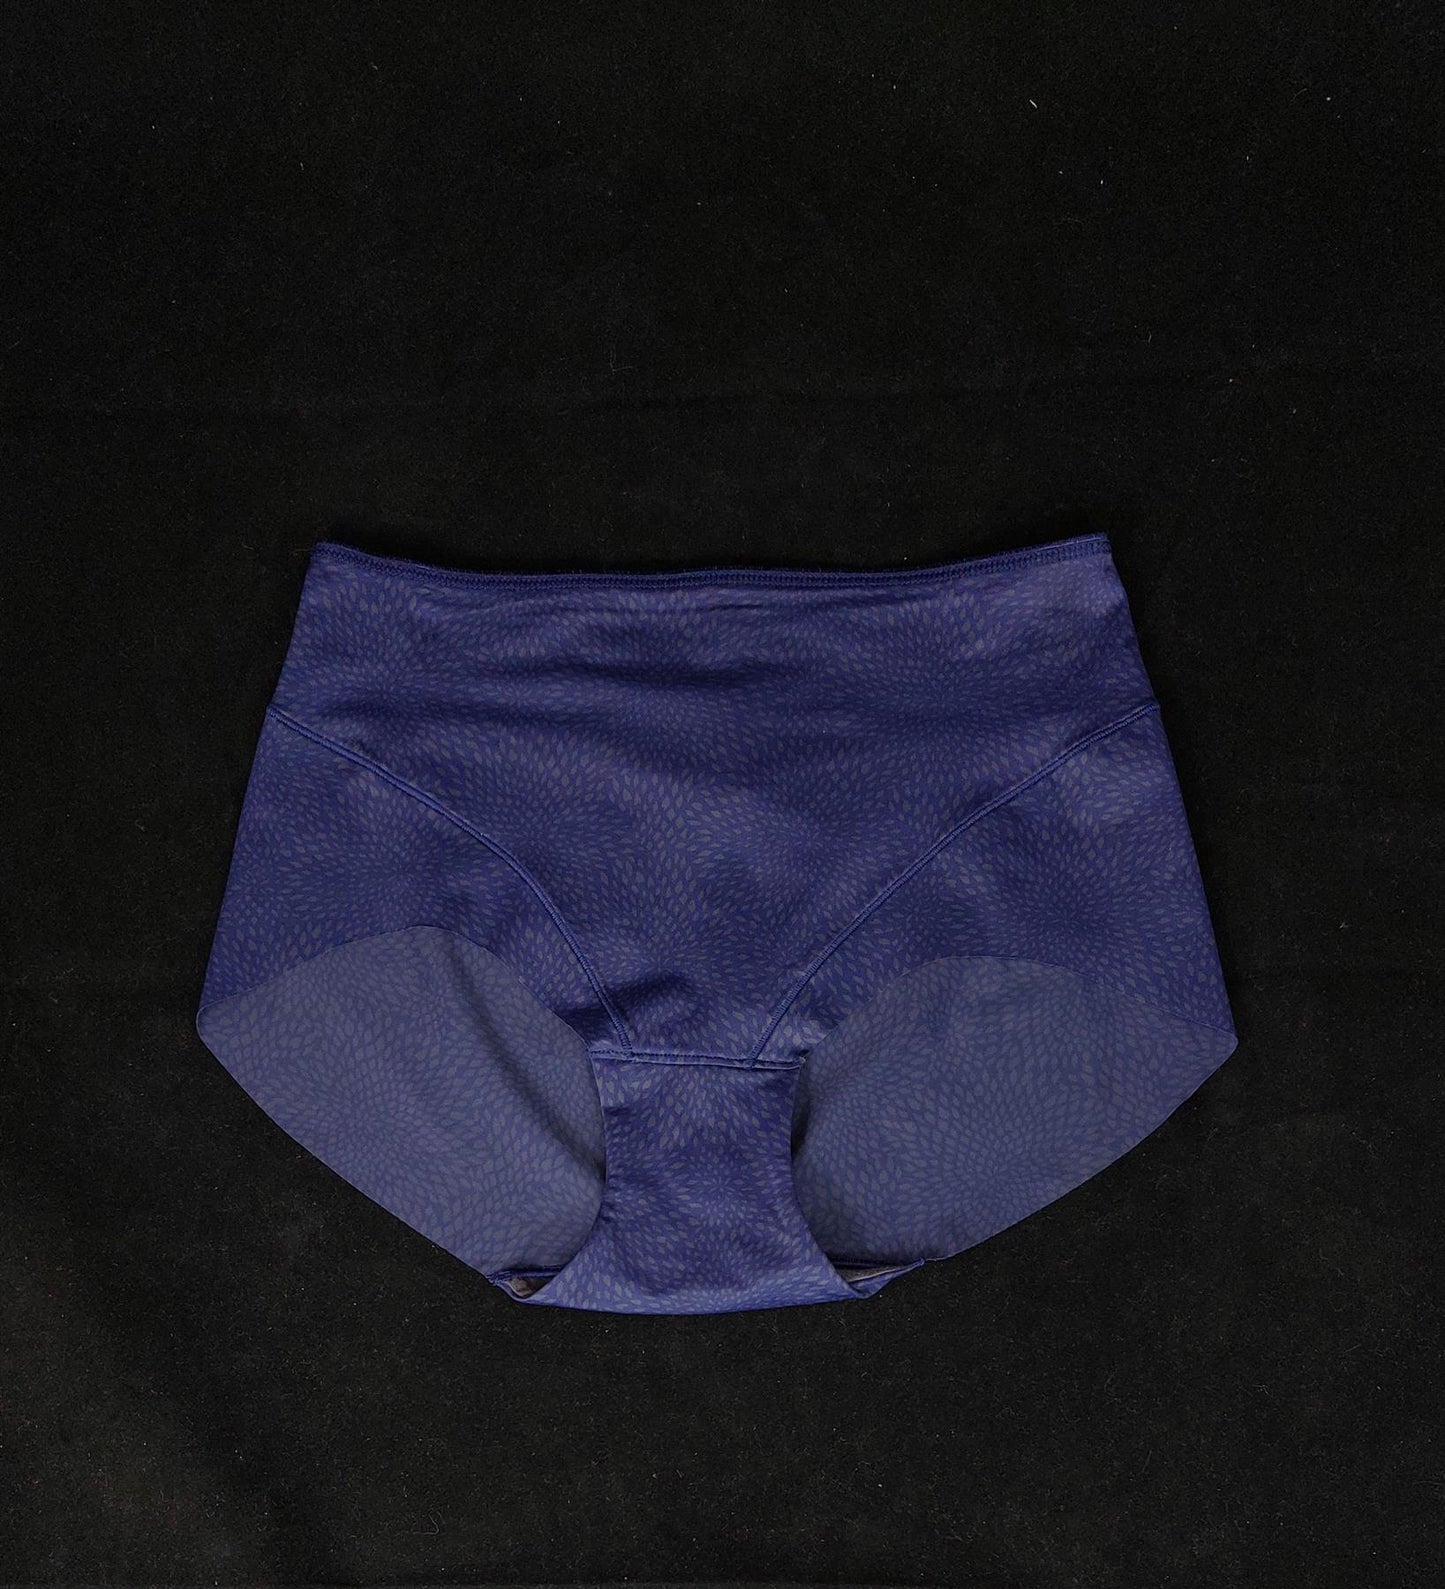 Waist Control Knickers Shaping Full Briefs No VPL Ex Chainstore Plus Size New